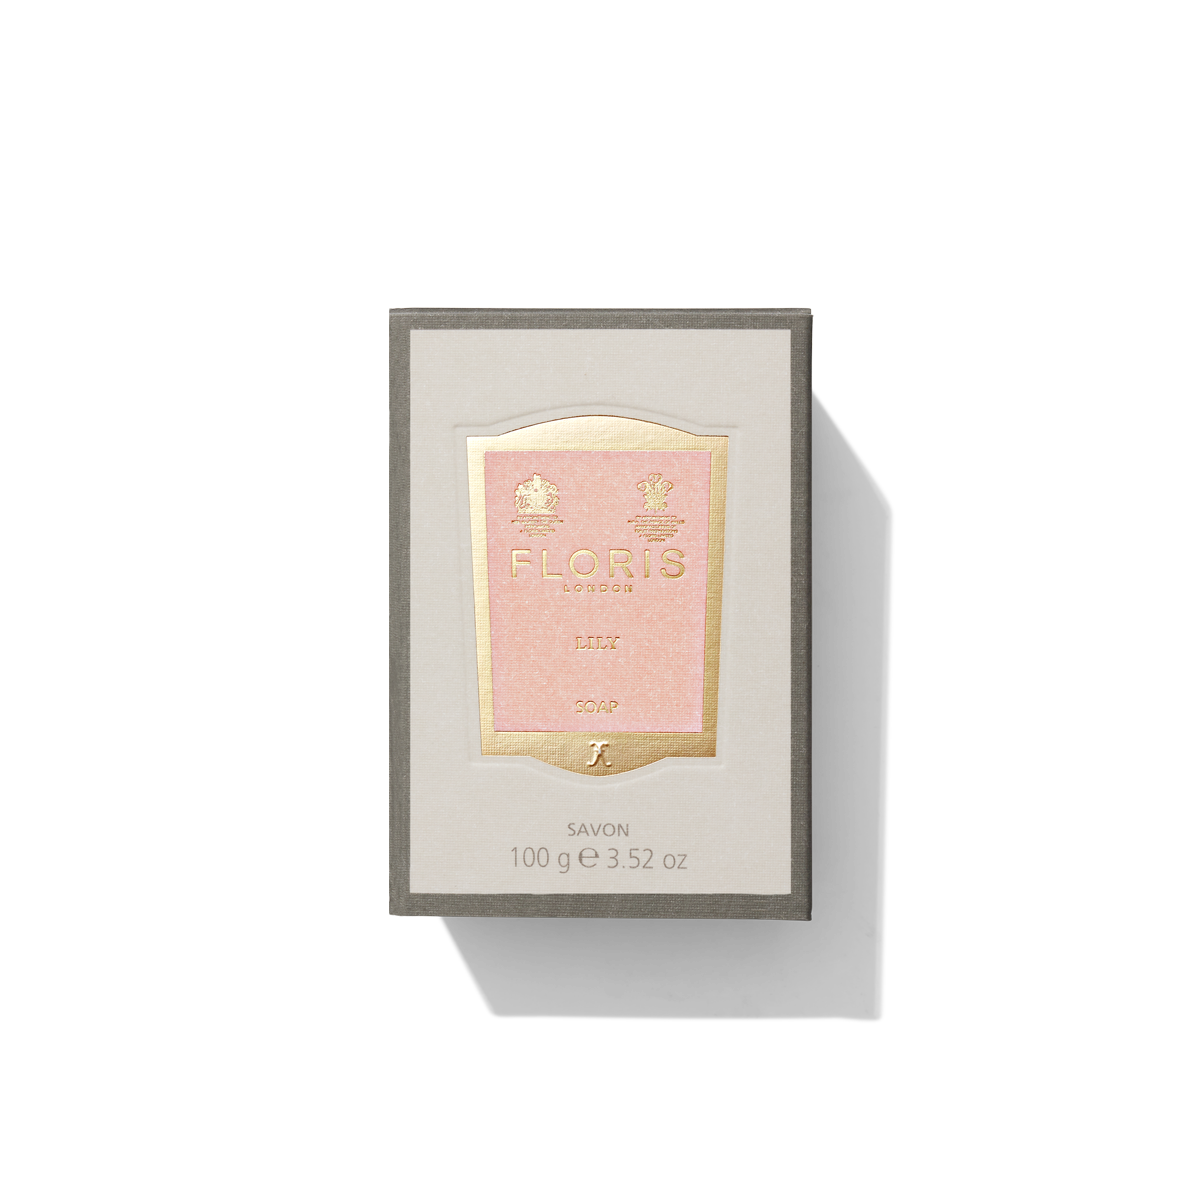 Small grey box with light pink and gold label containing Lily Luxury Soap